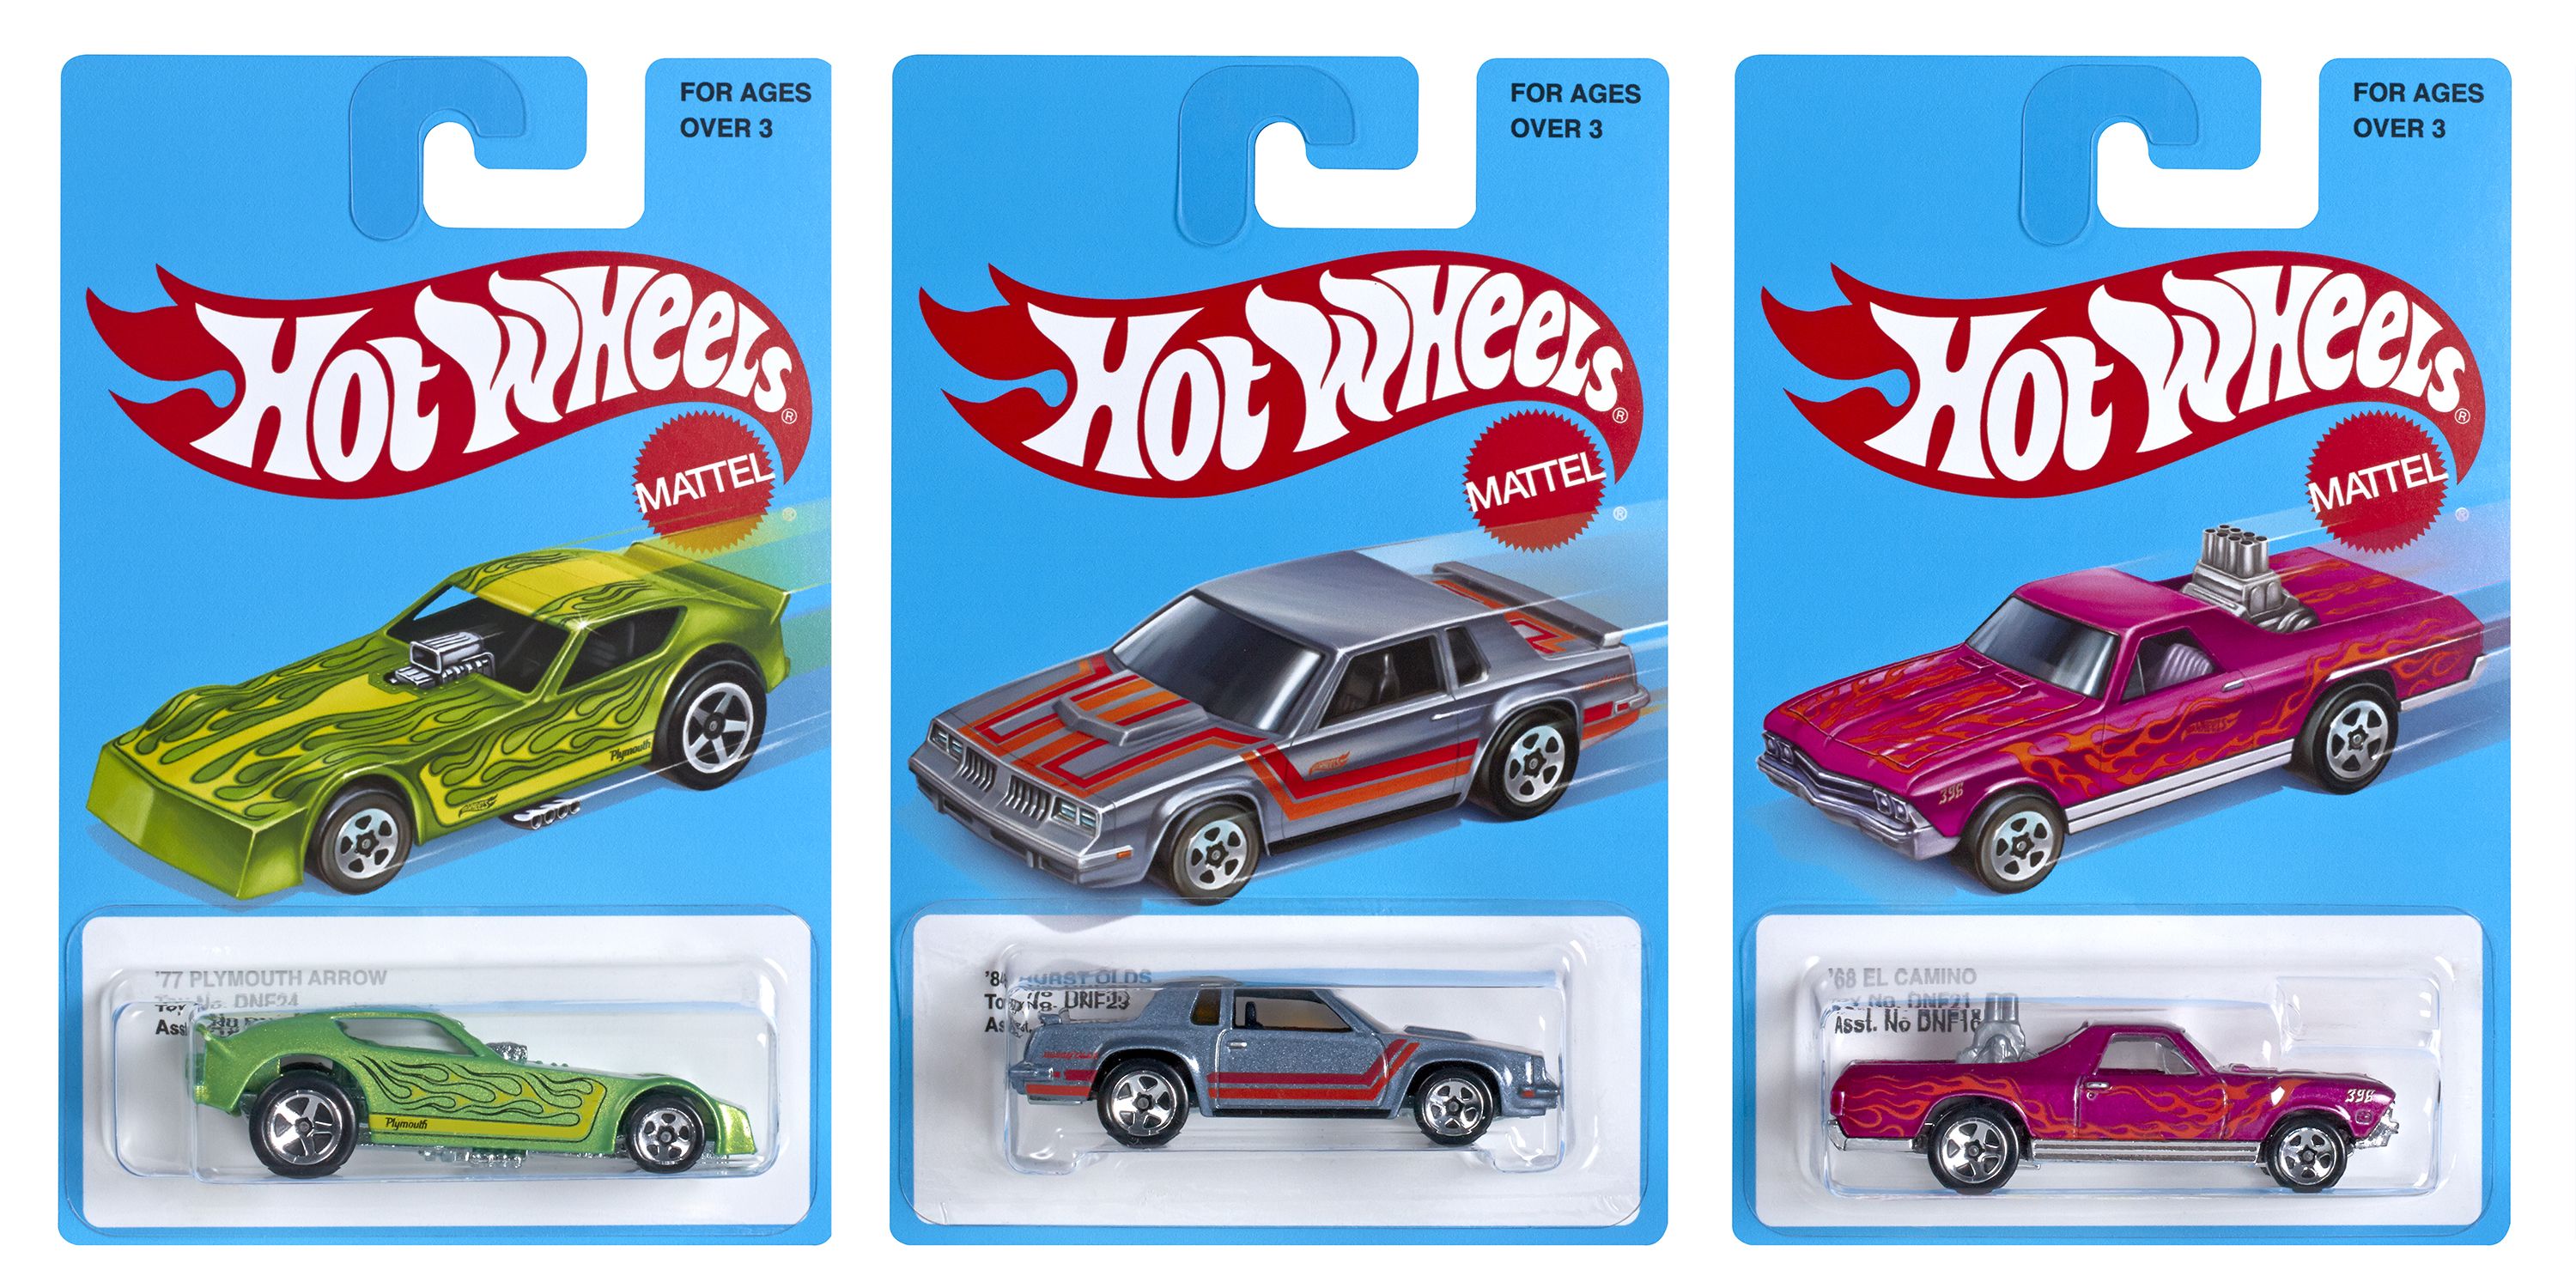 hot wheels from the 80s